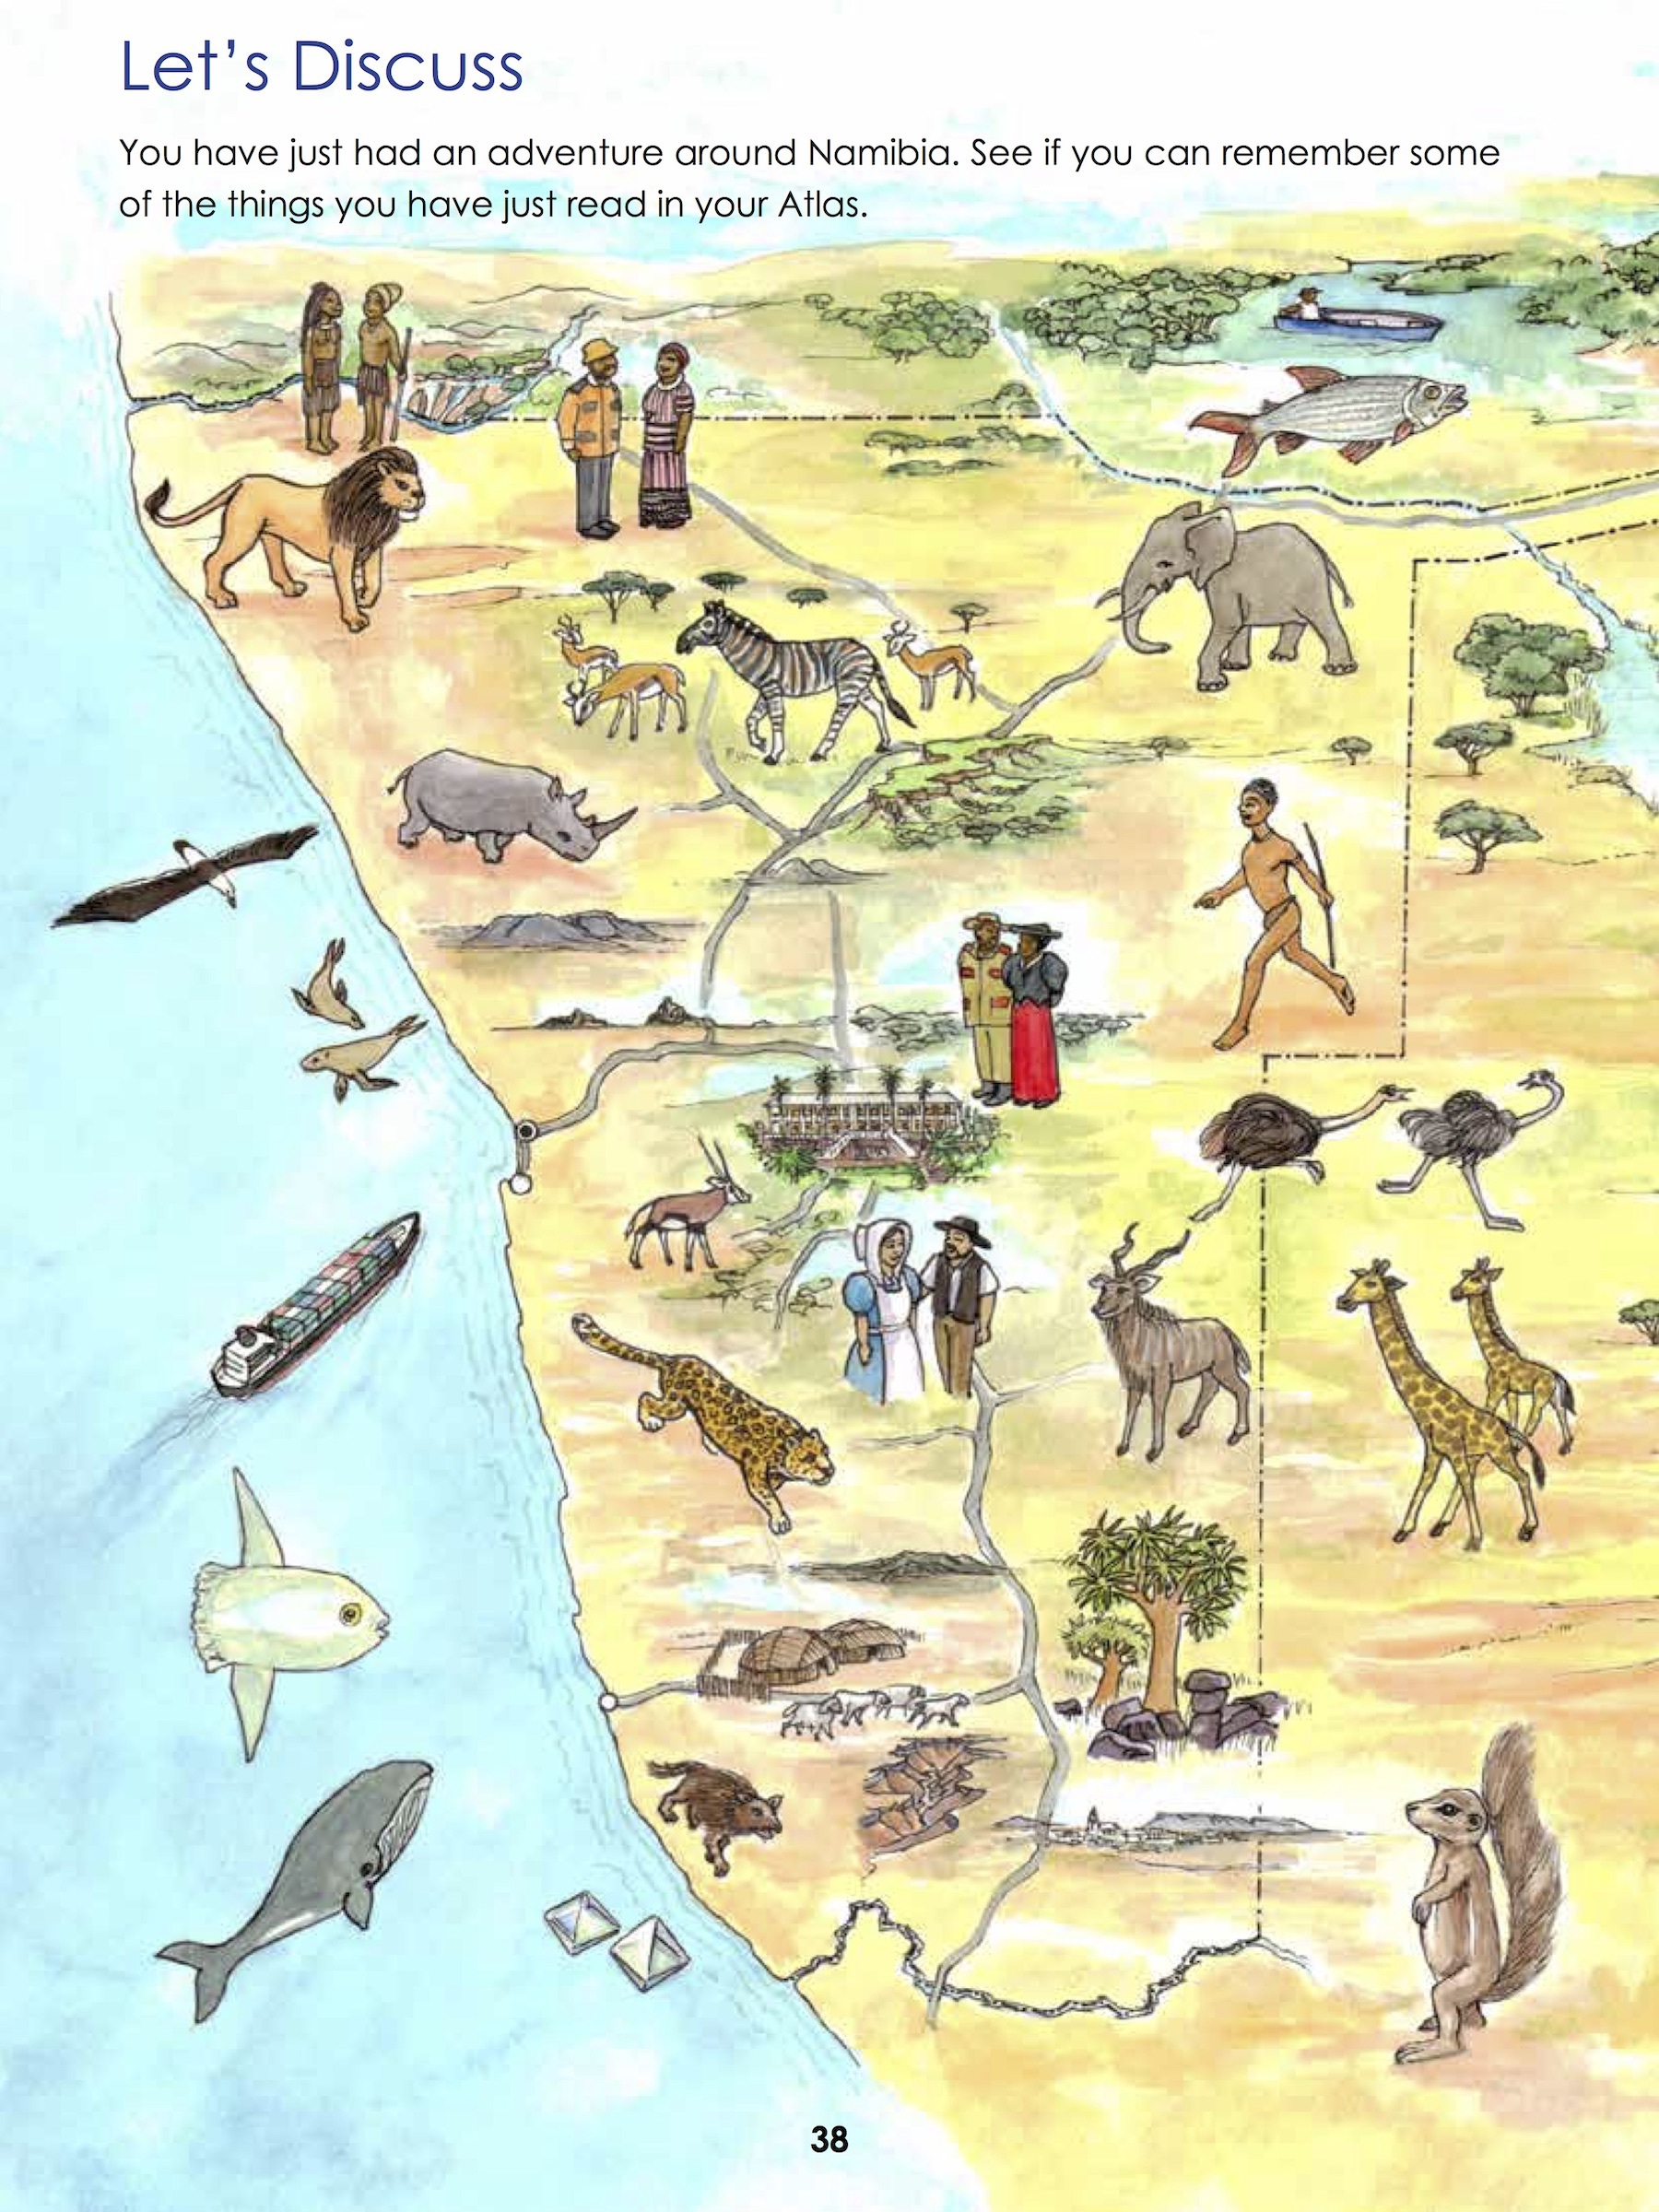 An example page from the Children's Atlas of Namibia.